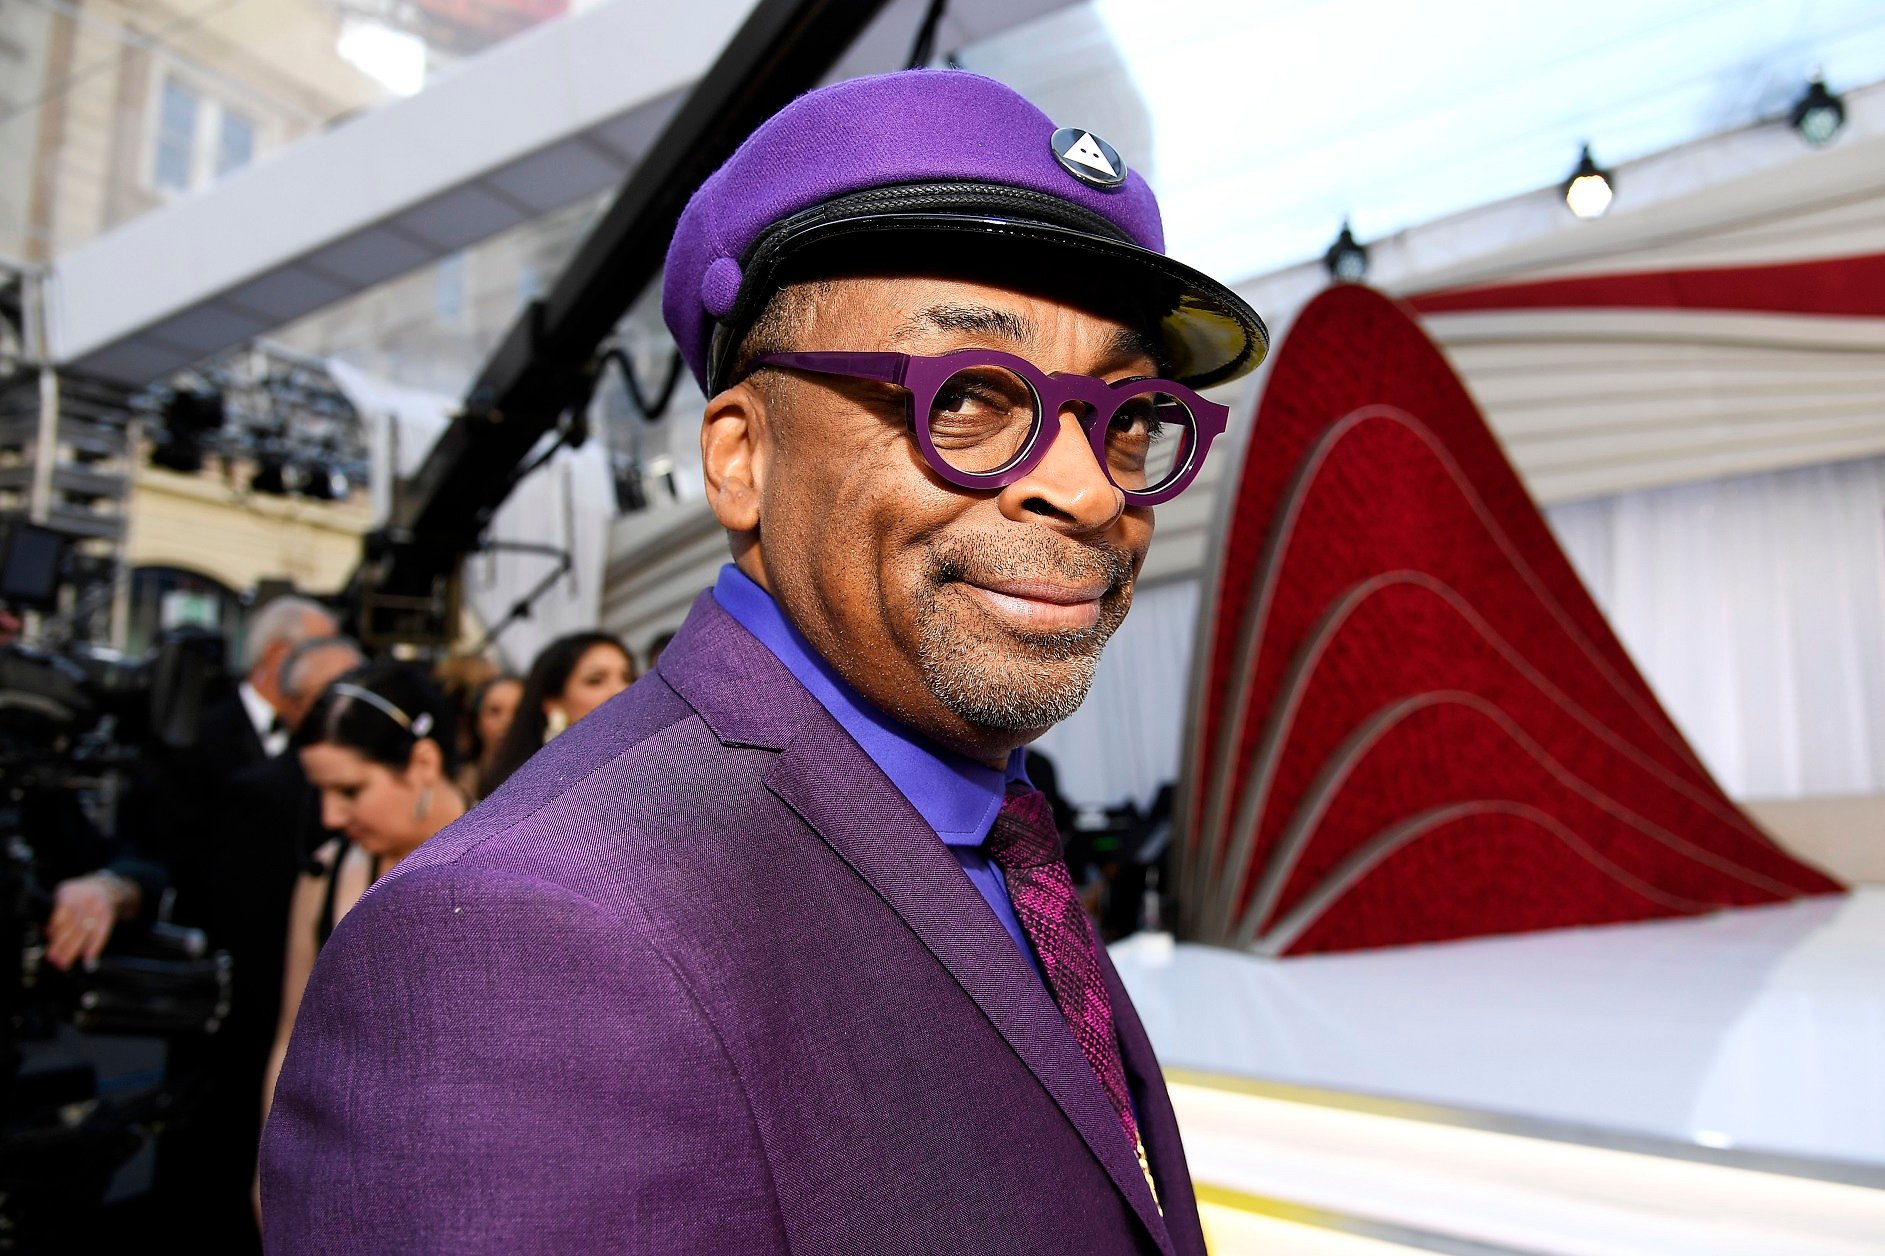  How Much Spike Lee Net Worth?